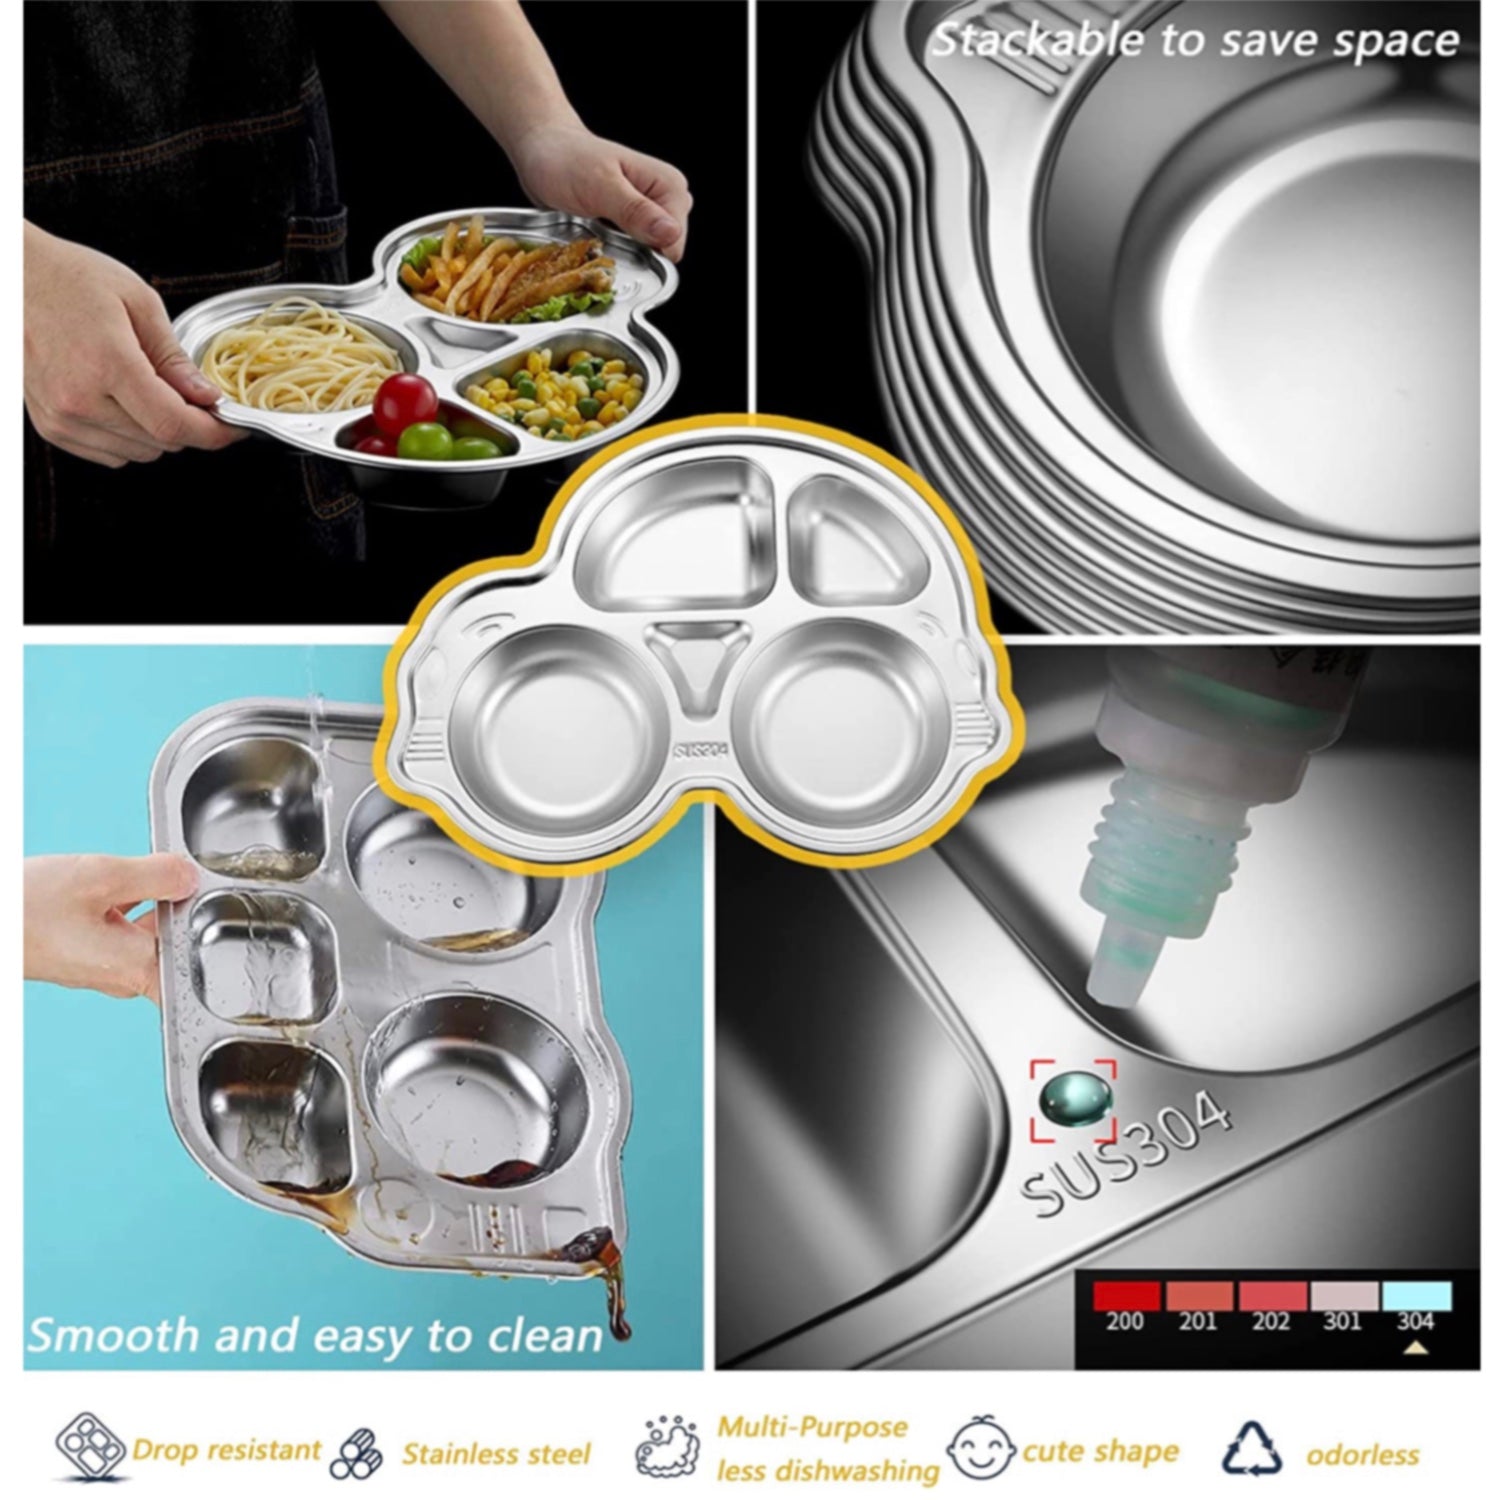 Theoni Stainless Steel Divided Meal  Plate Tray - 5Compartments Dinner Dish for Baby- Toddler- Kids Feeding set - bus  Shape- BPA-Free Safe Fun Non-Toxic Heavy Duty .